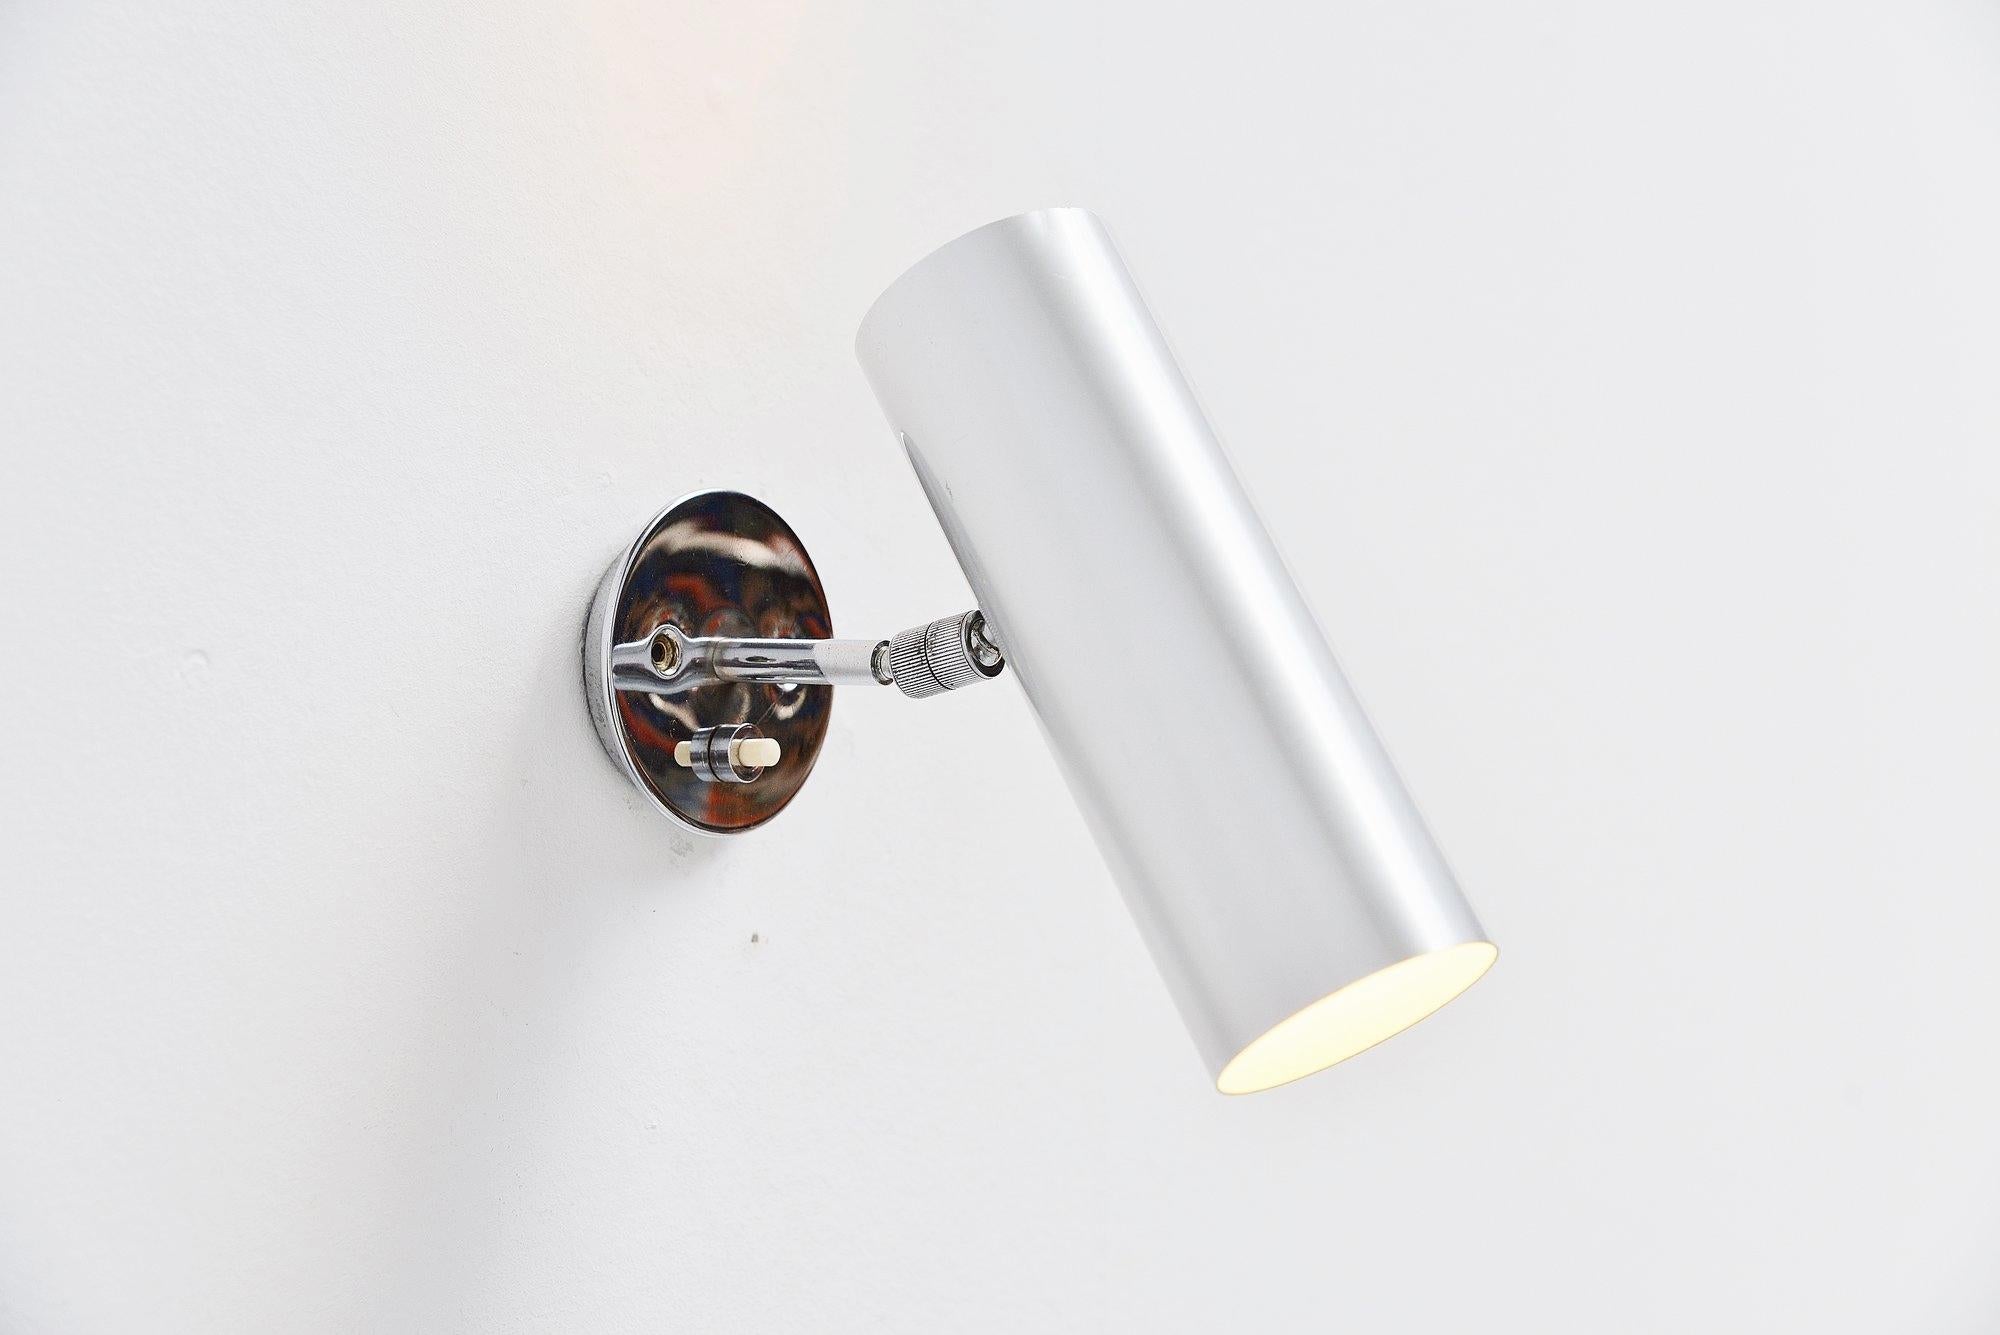 Minimalist wall lamp model 31B designed by Gino Sarfatti, manufactured by Arteluce, Italy 1950. The light has an aluminium shade, with chrome plated adjustable wall arm. The lamp is unmarked but written with the quality of Arteluce all over. This